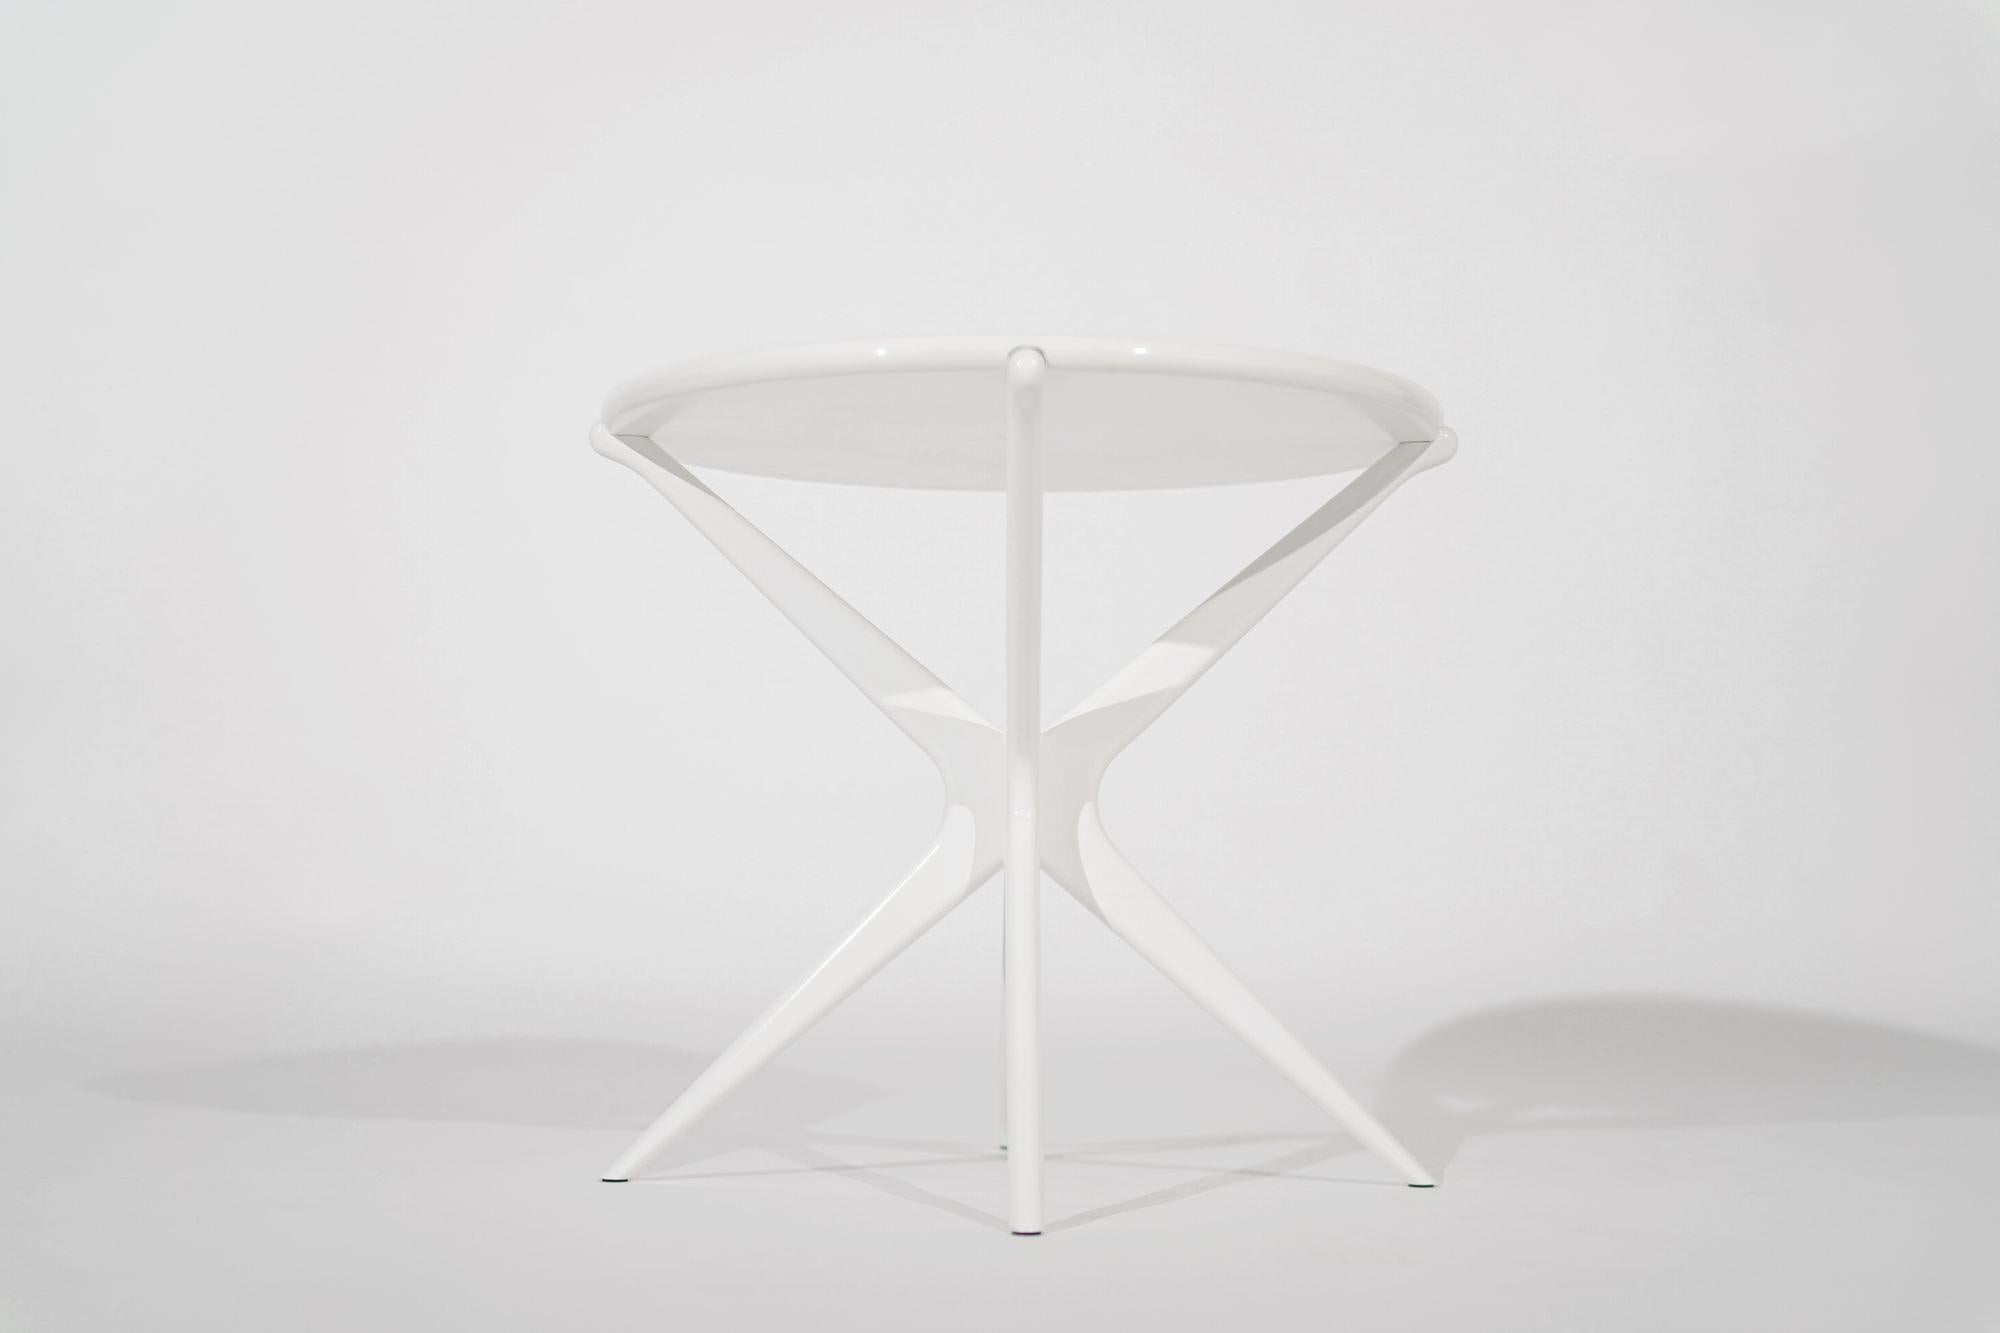 Contemporary Gazelle V2 End Tables in White Lacquer by Stamford Modern For Sale